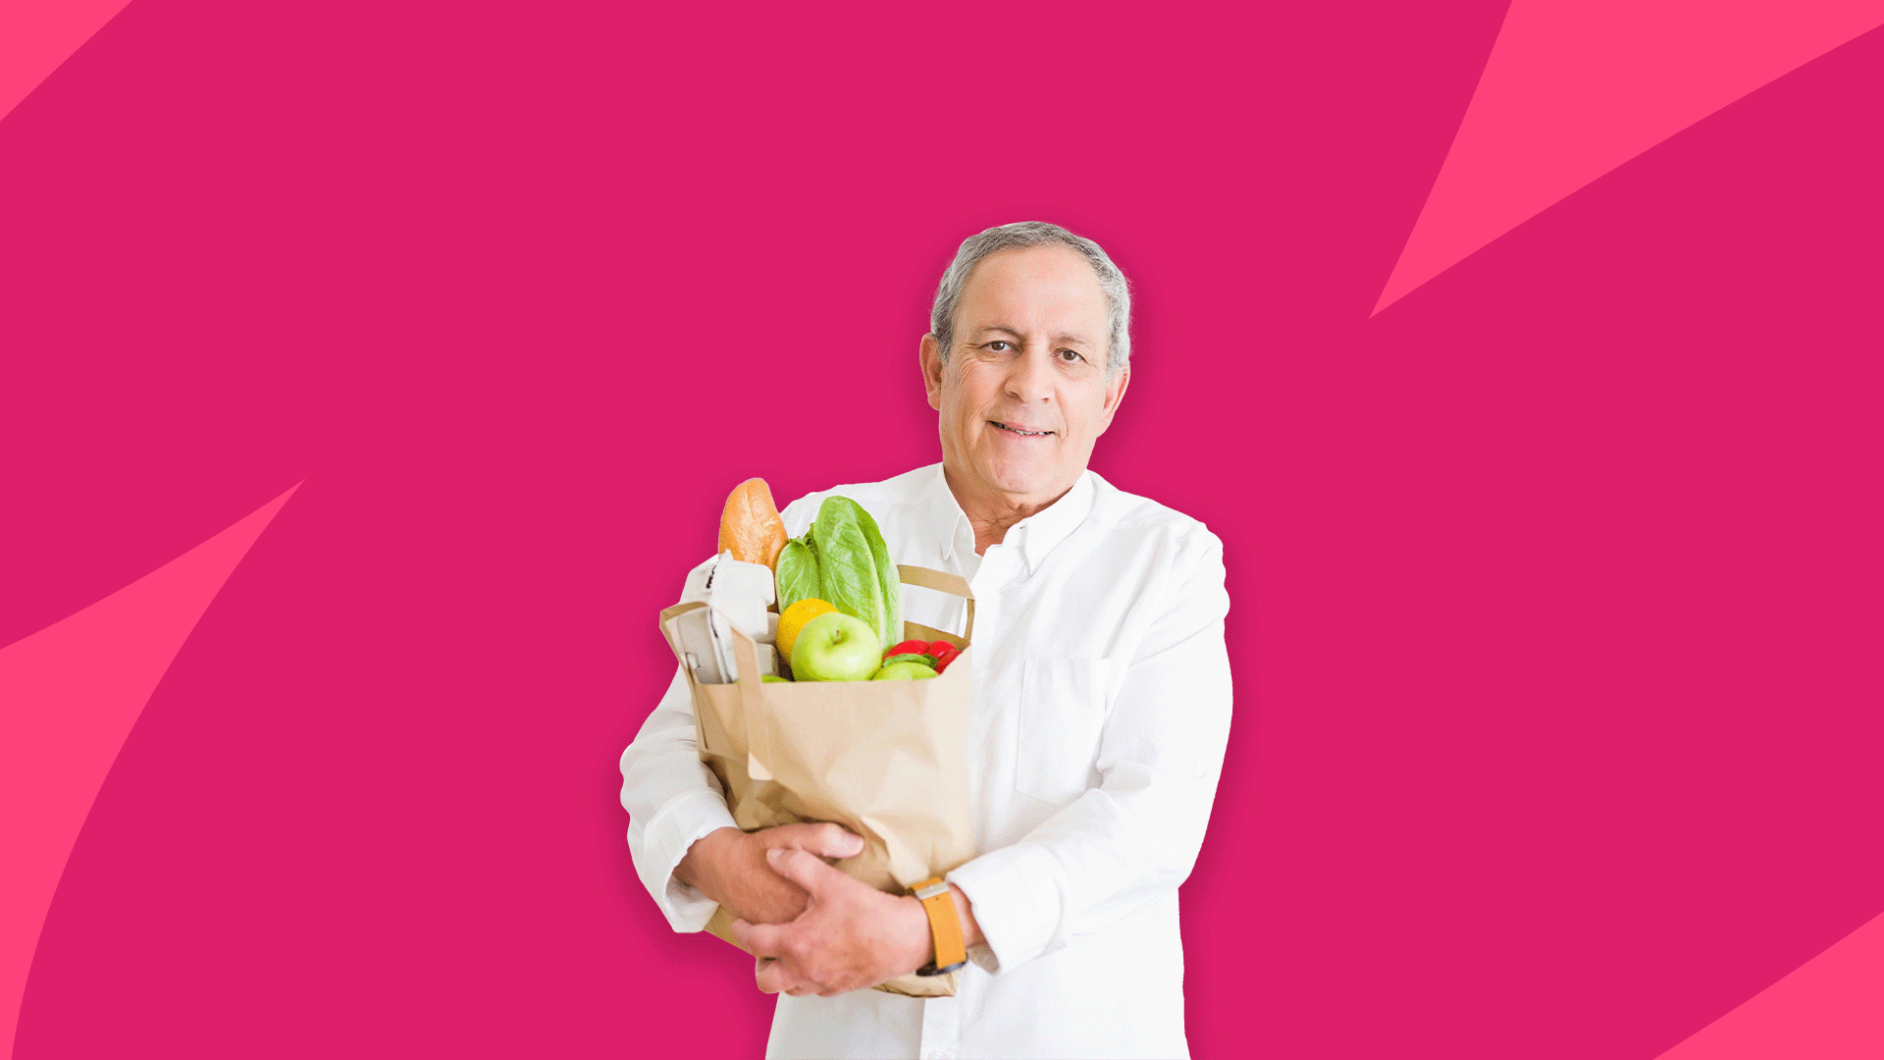 A doctor holding a bag of groceries: Radish benefits